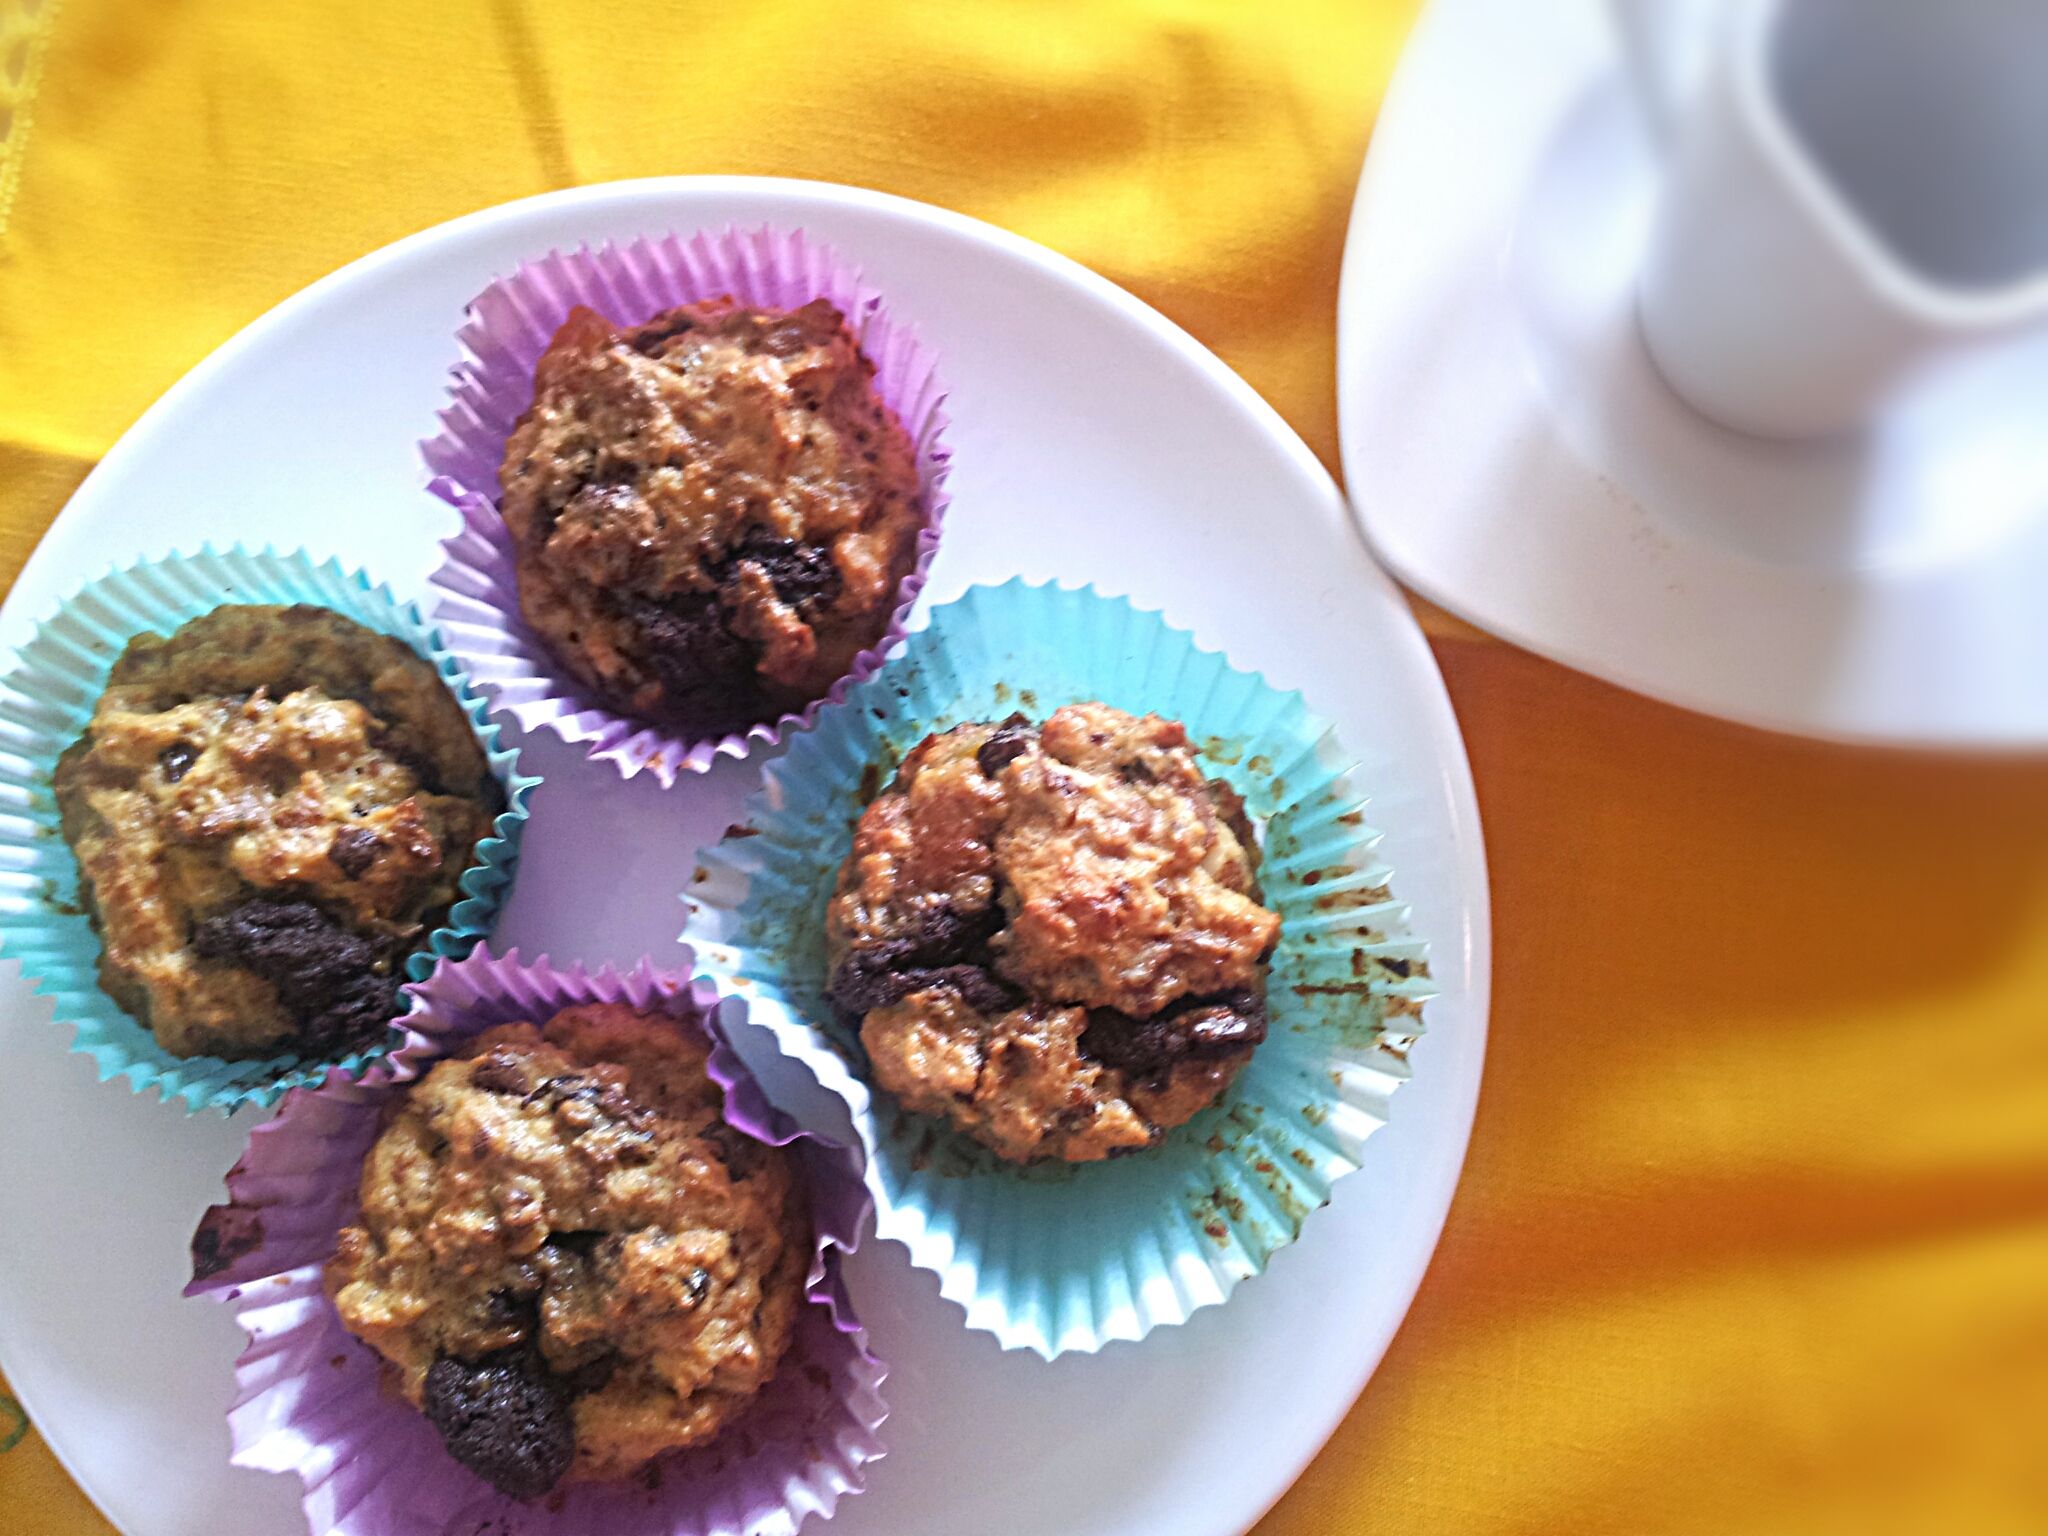 Panettone Muffins with Chocolate